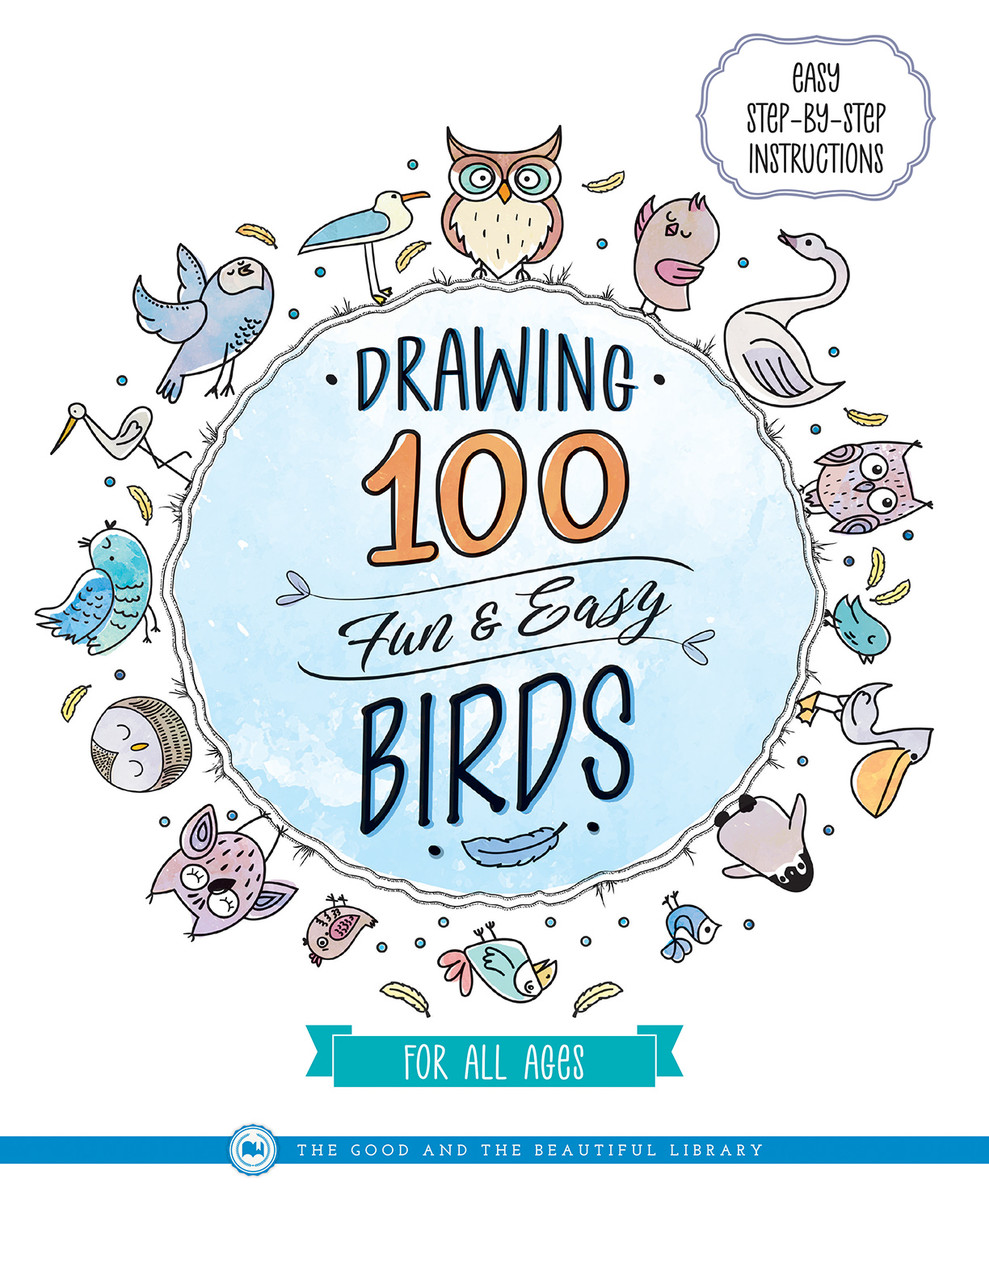 Buy Drawing Books For Kids Birds Books Online at Bookswagon & Get